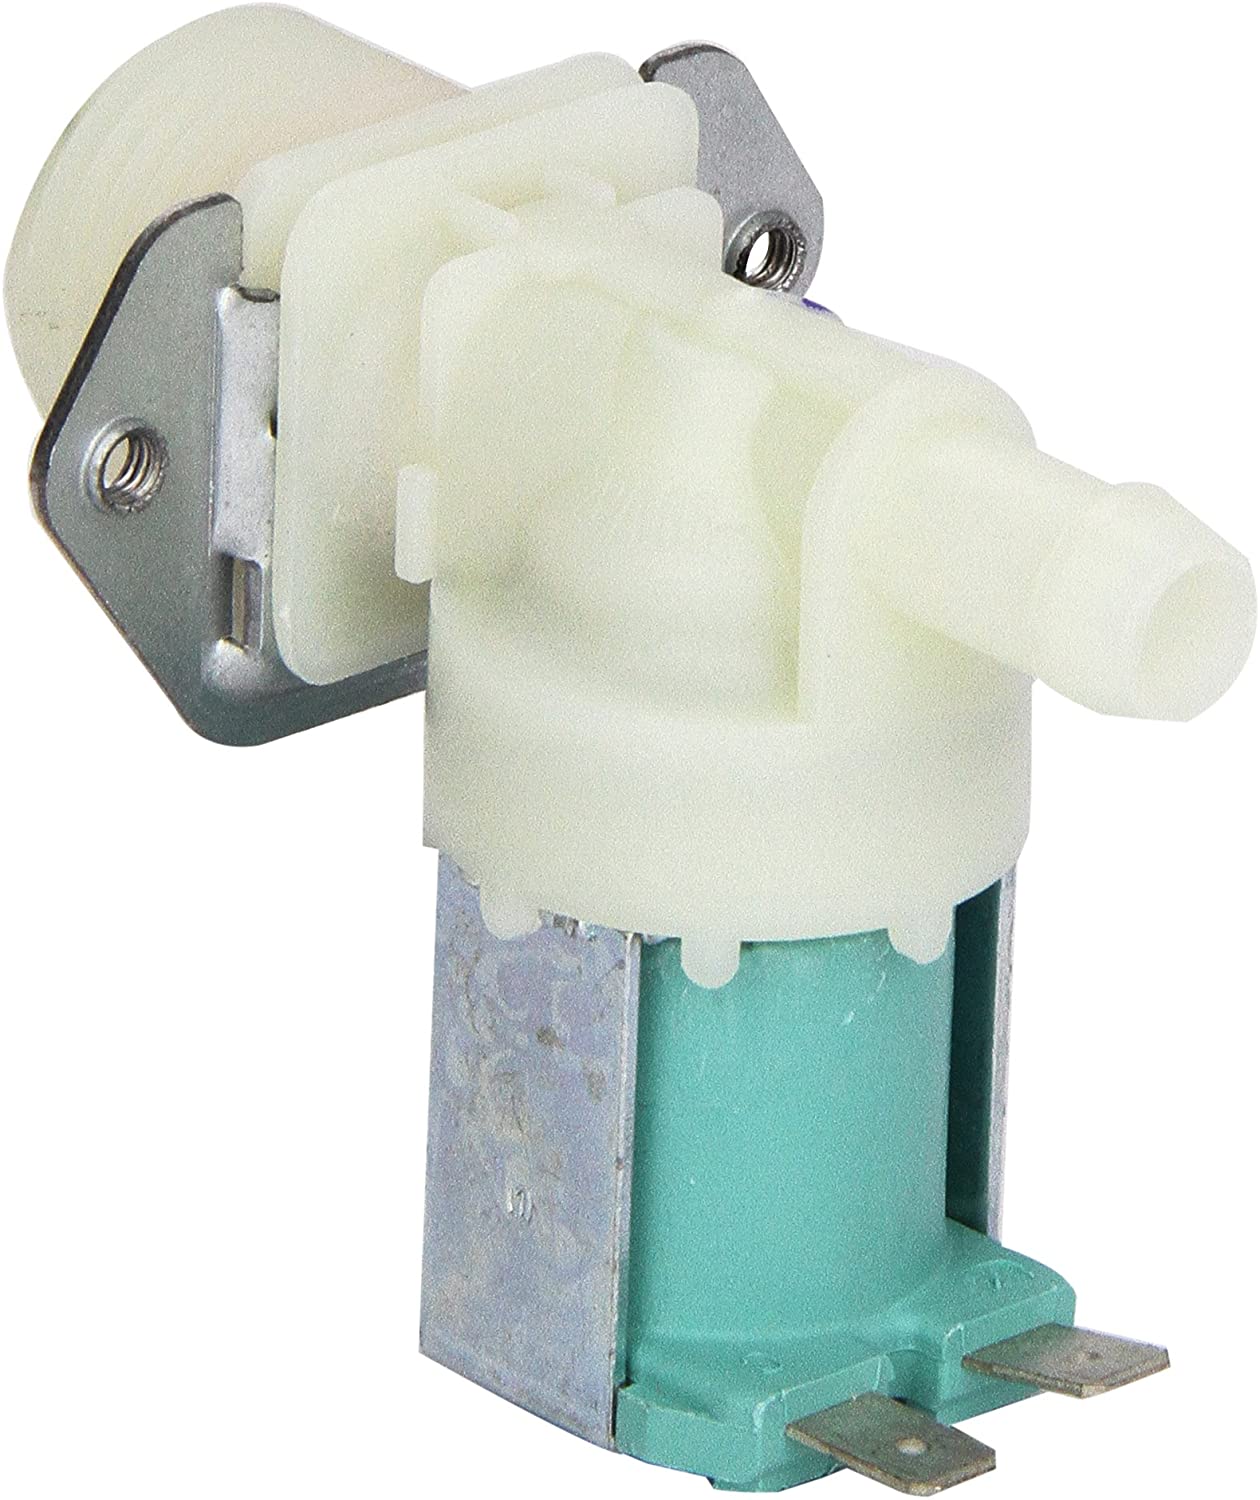 Whirlpool Washer Hot Water Inlet Valve. Part #WP34001131